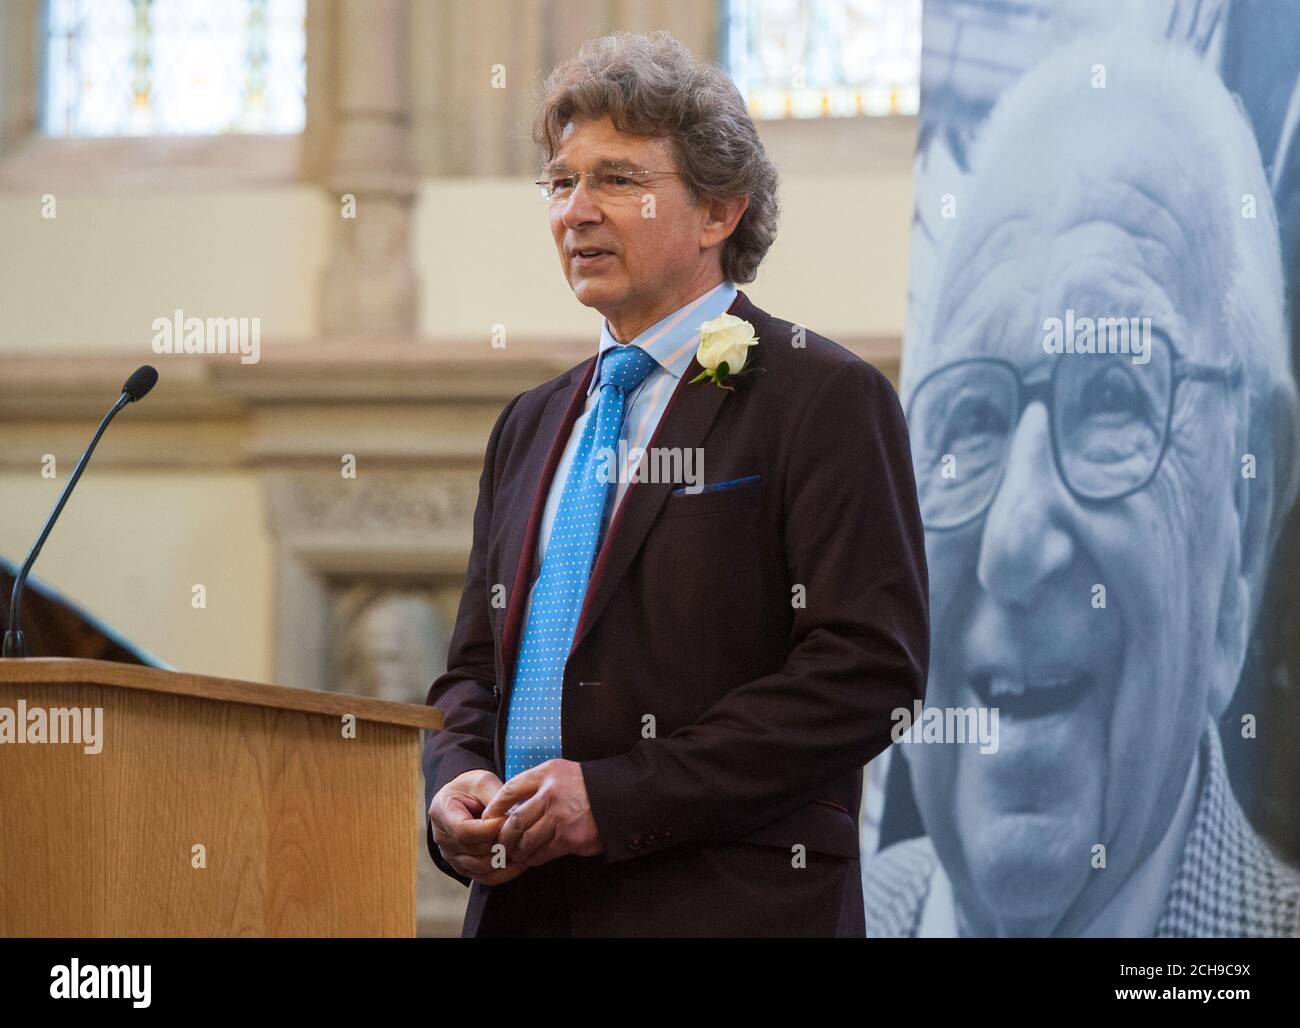 Nick Winton, the son of Sir Nicholas Winton, speaks at a memorial service for his father at the Old Library at the Guildhall, in central London. Stock Photo